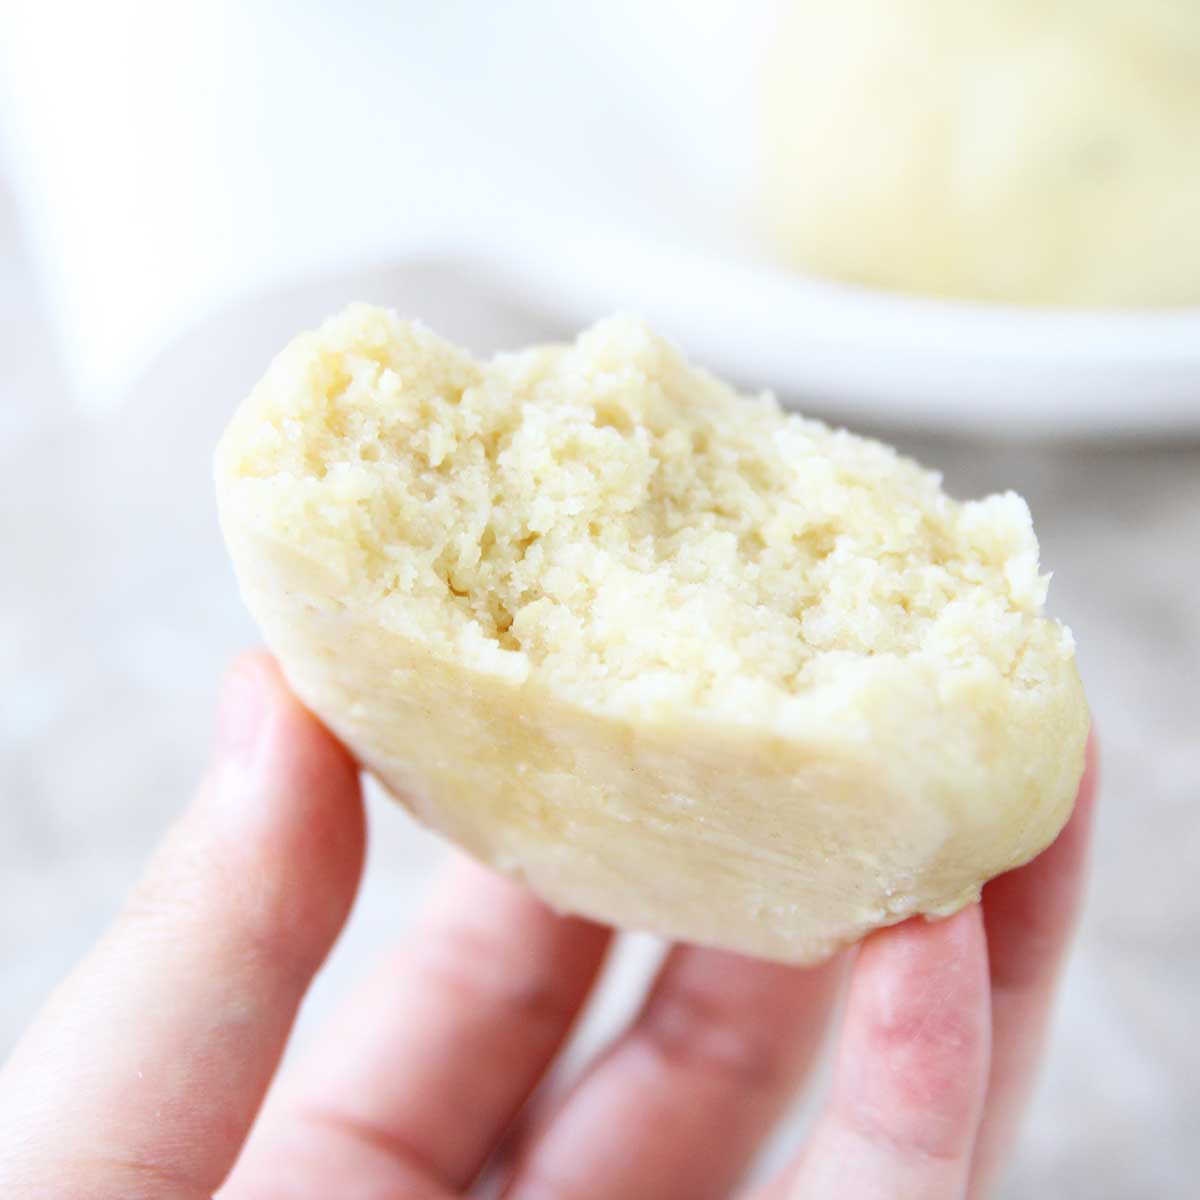 3-Ingredient Vegan Steamed Buns "Mantou" Recipe Made Without Yeast - steamed buns